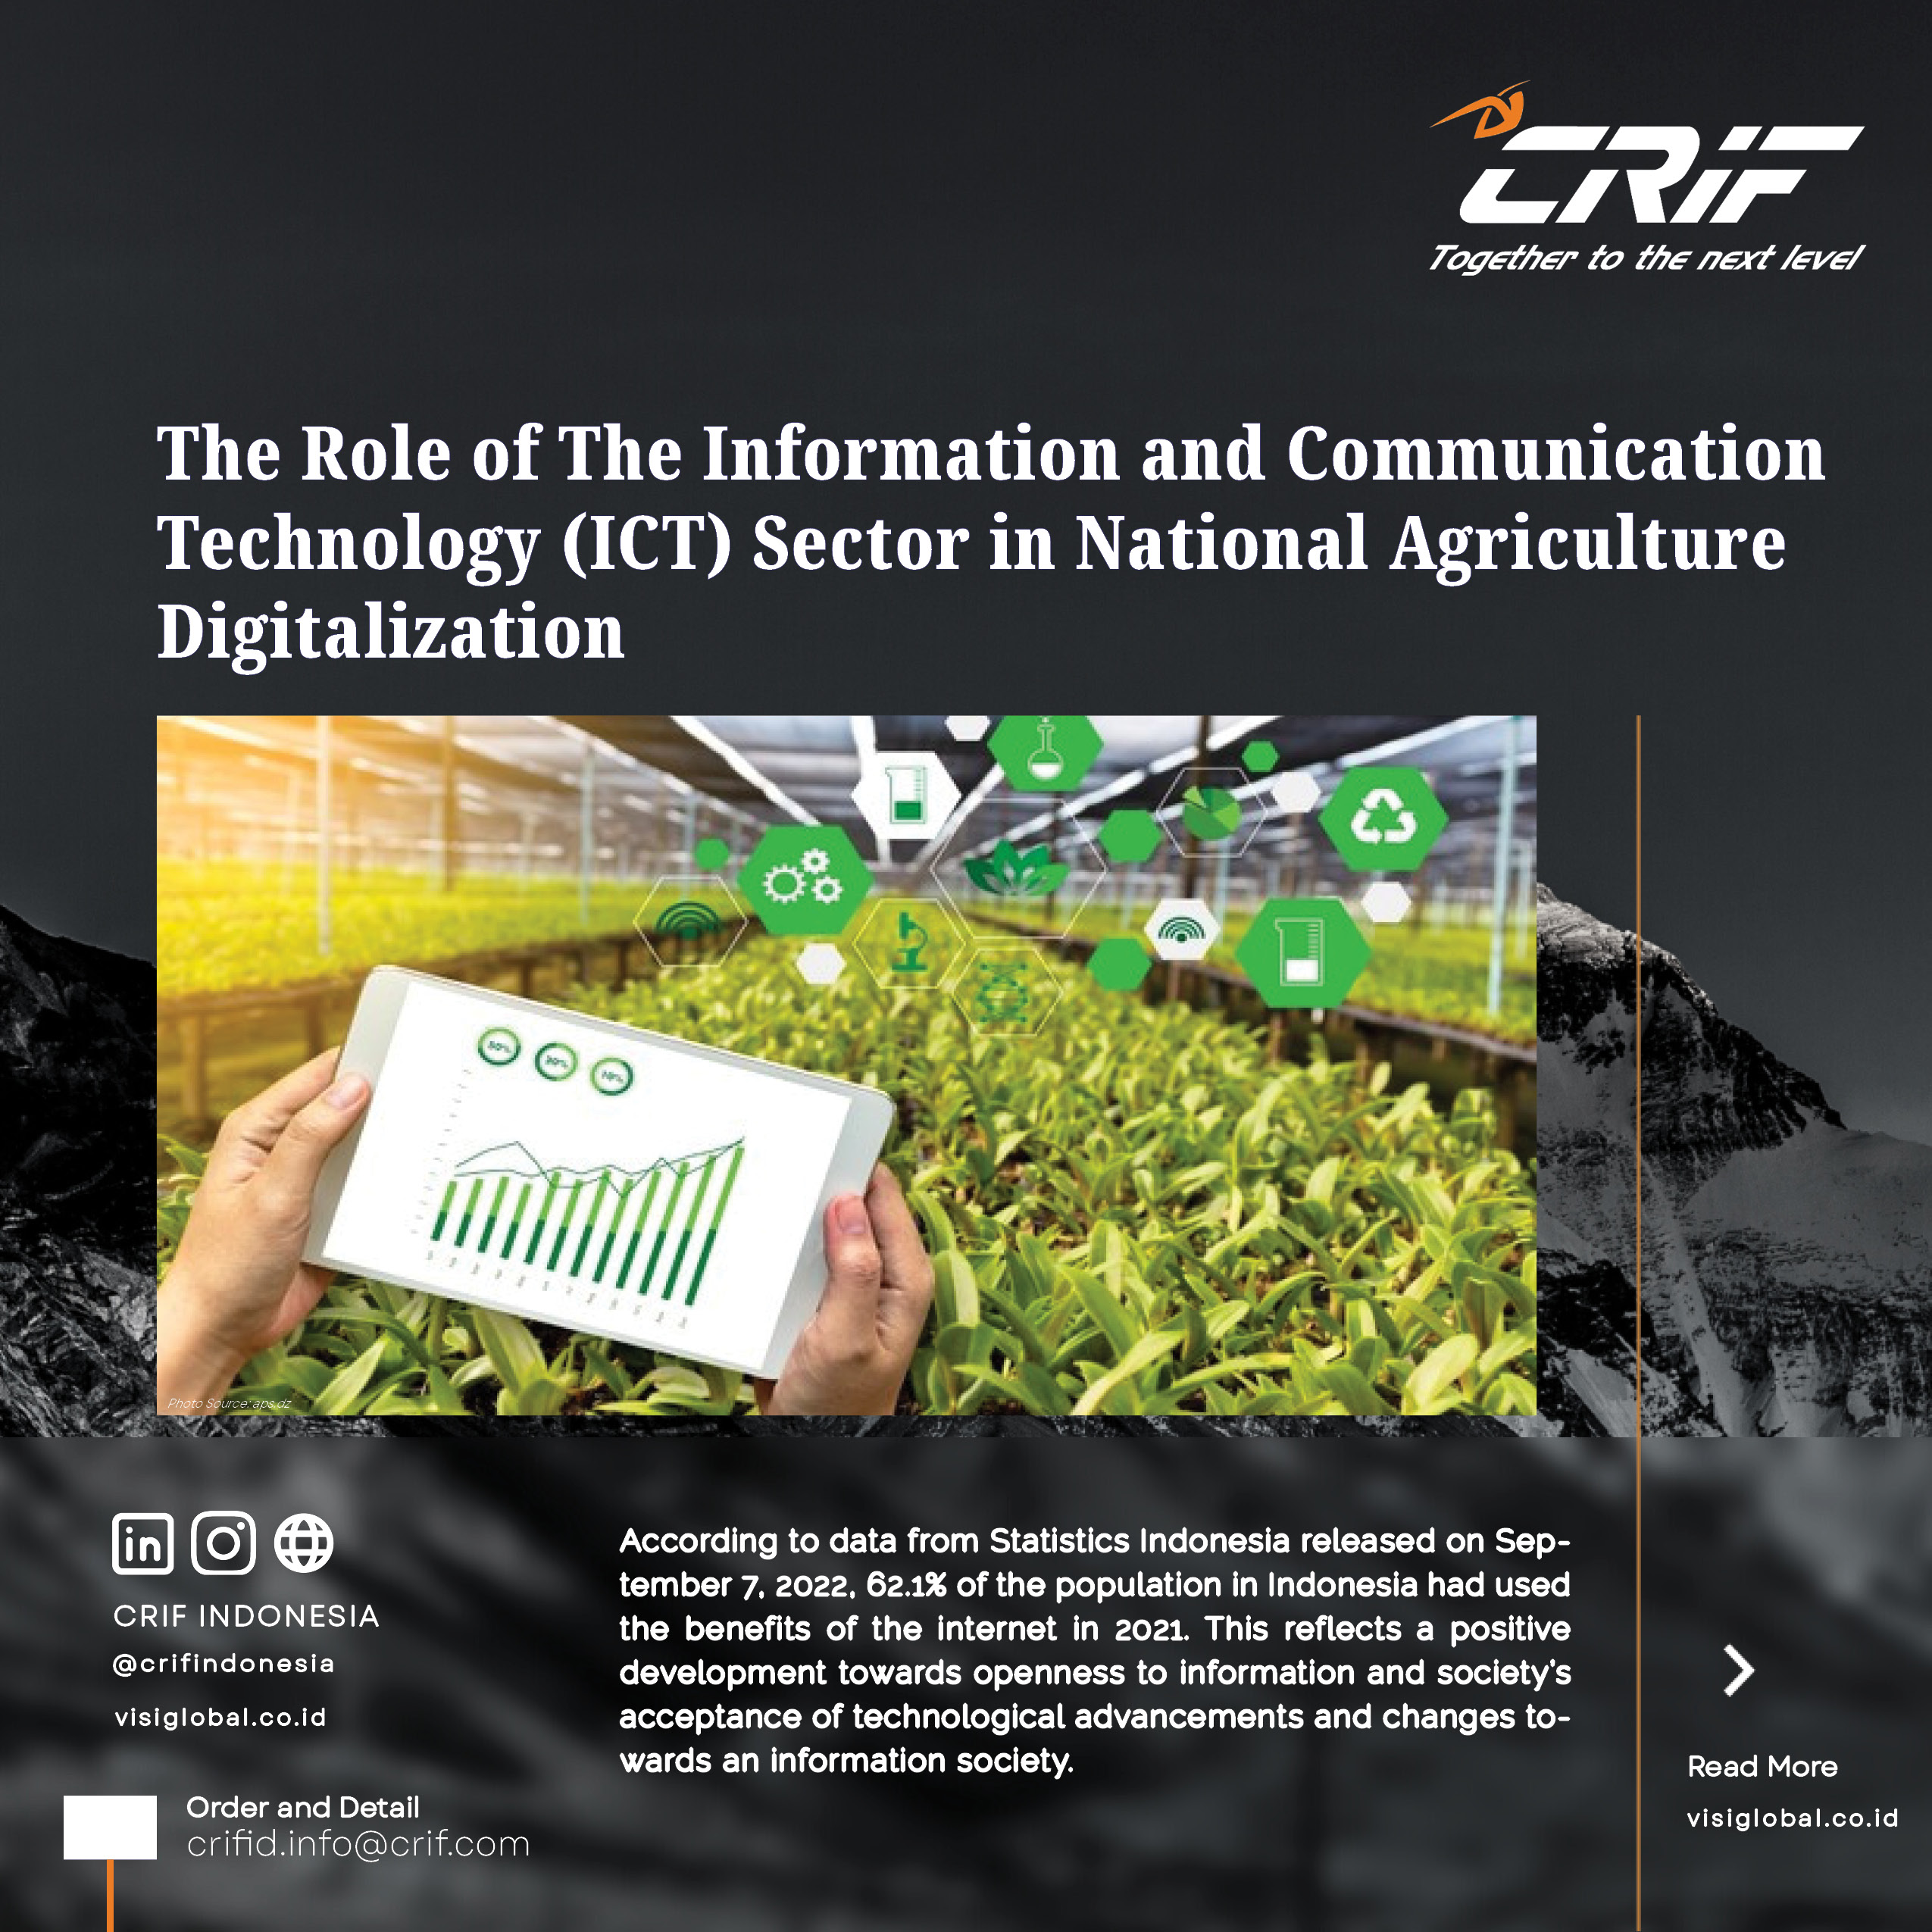 The Role of the Information & Communication Technology (ICT) Sector in National Agriculture Digitalization